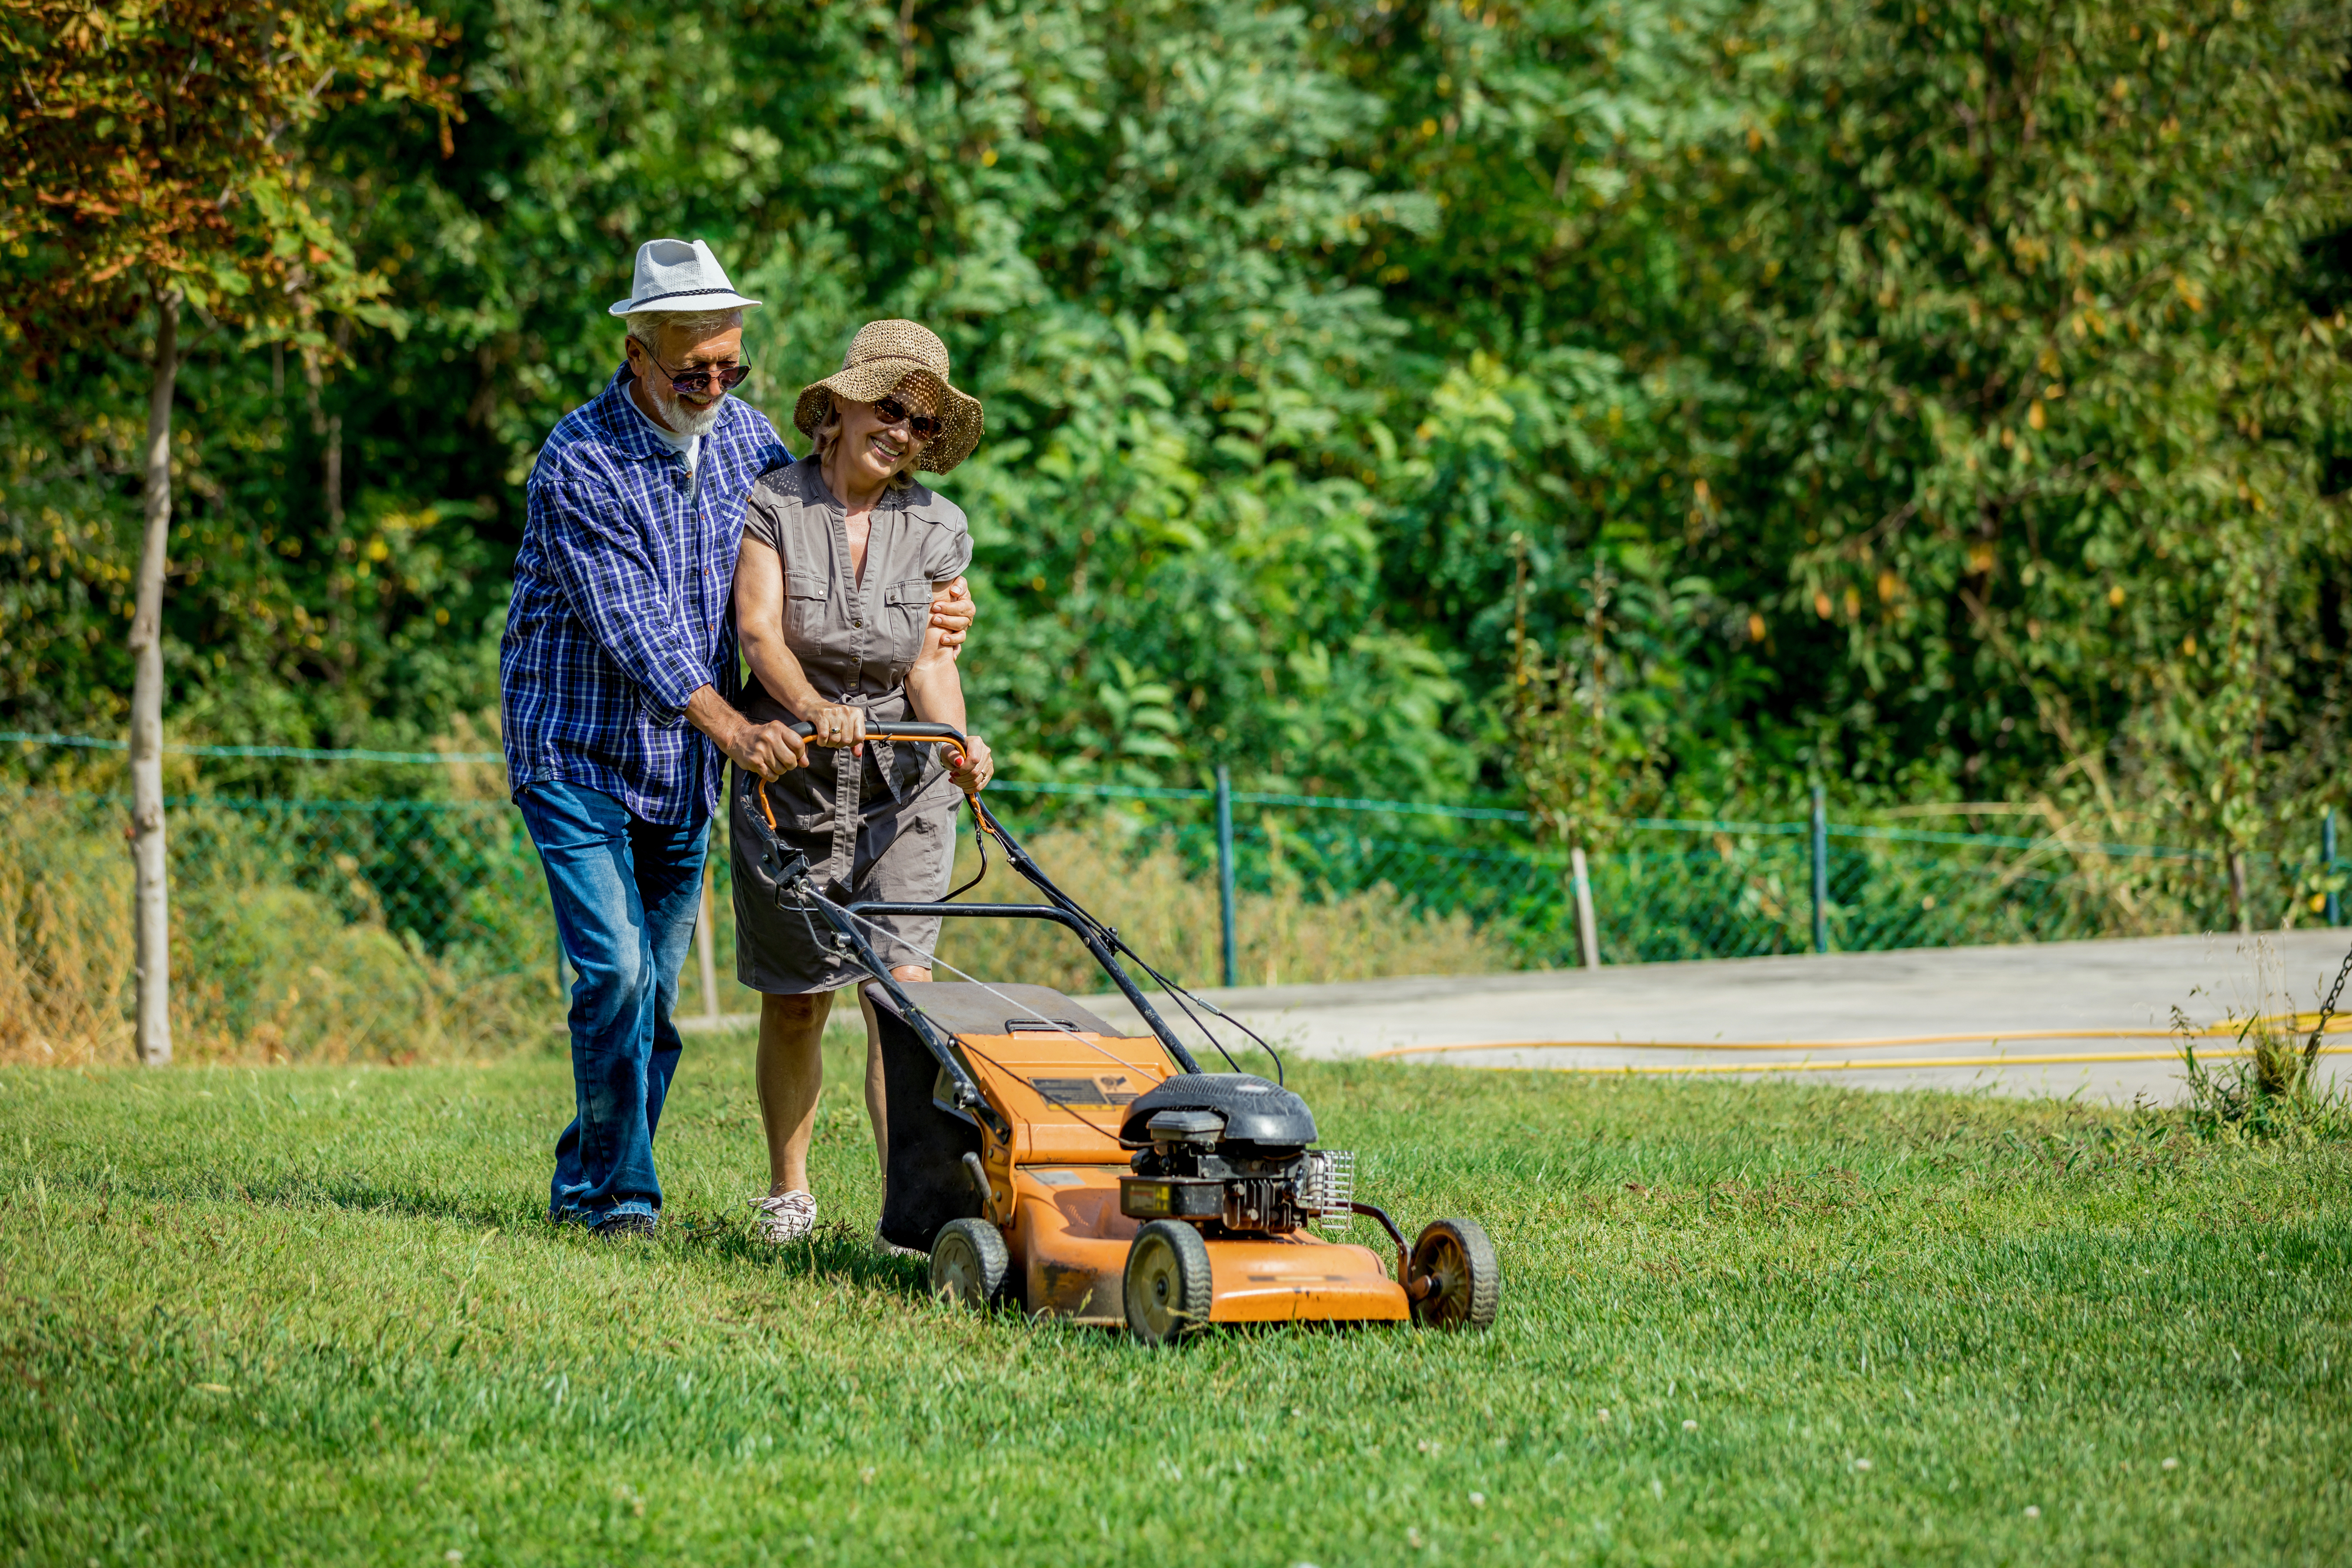 Two people mowing a lawn